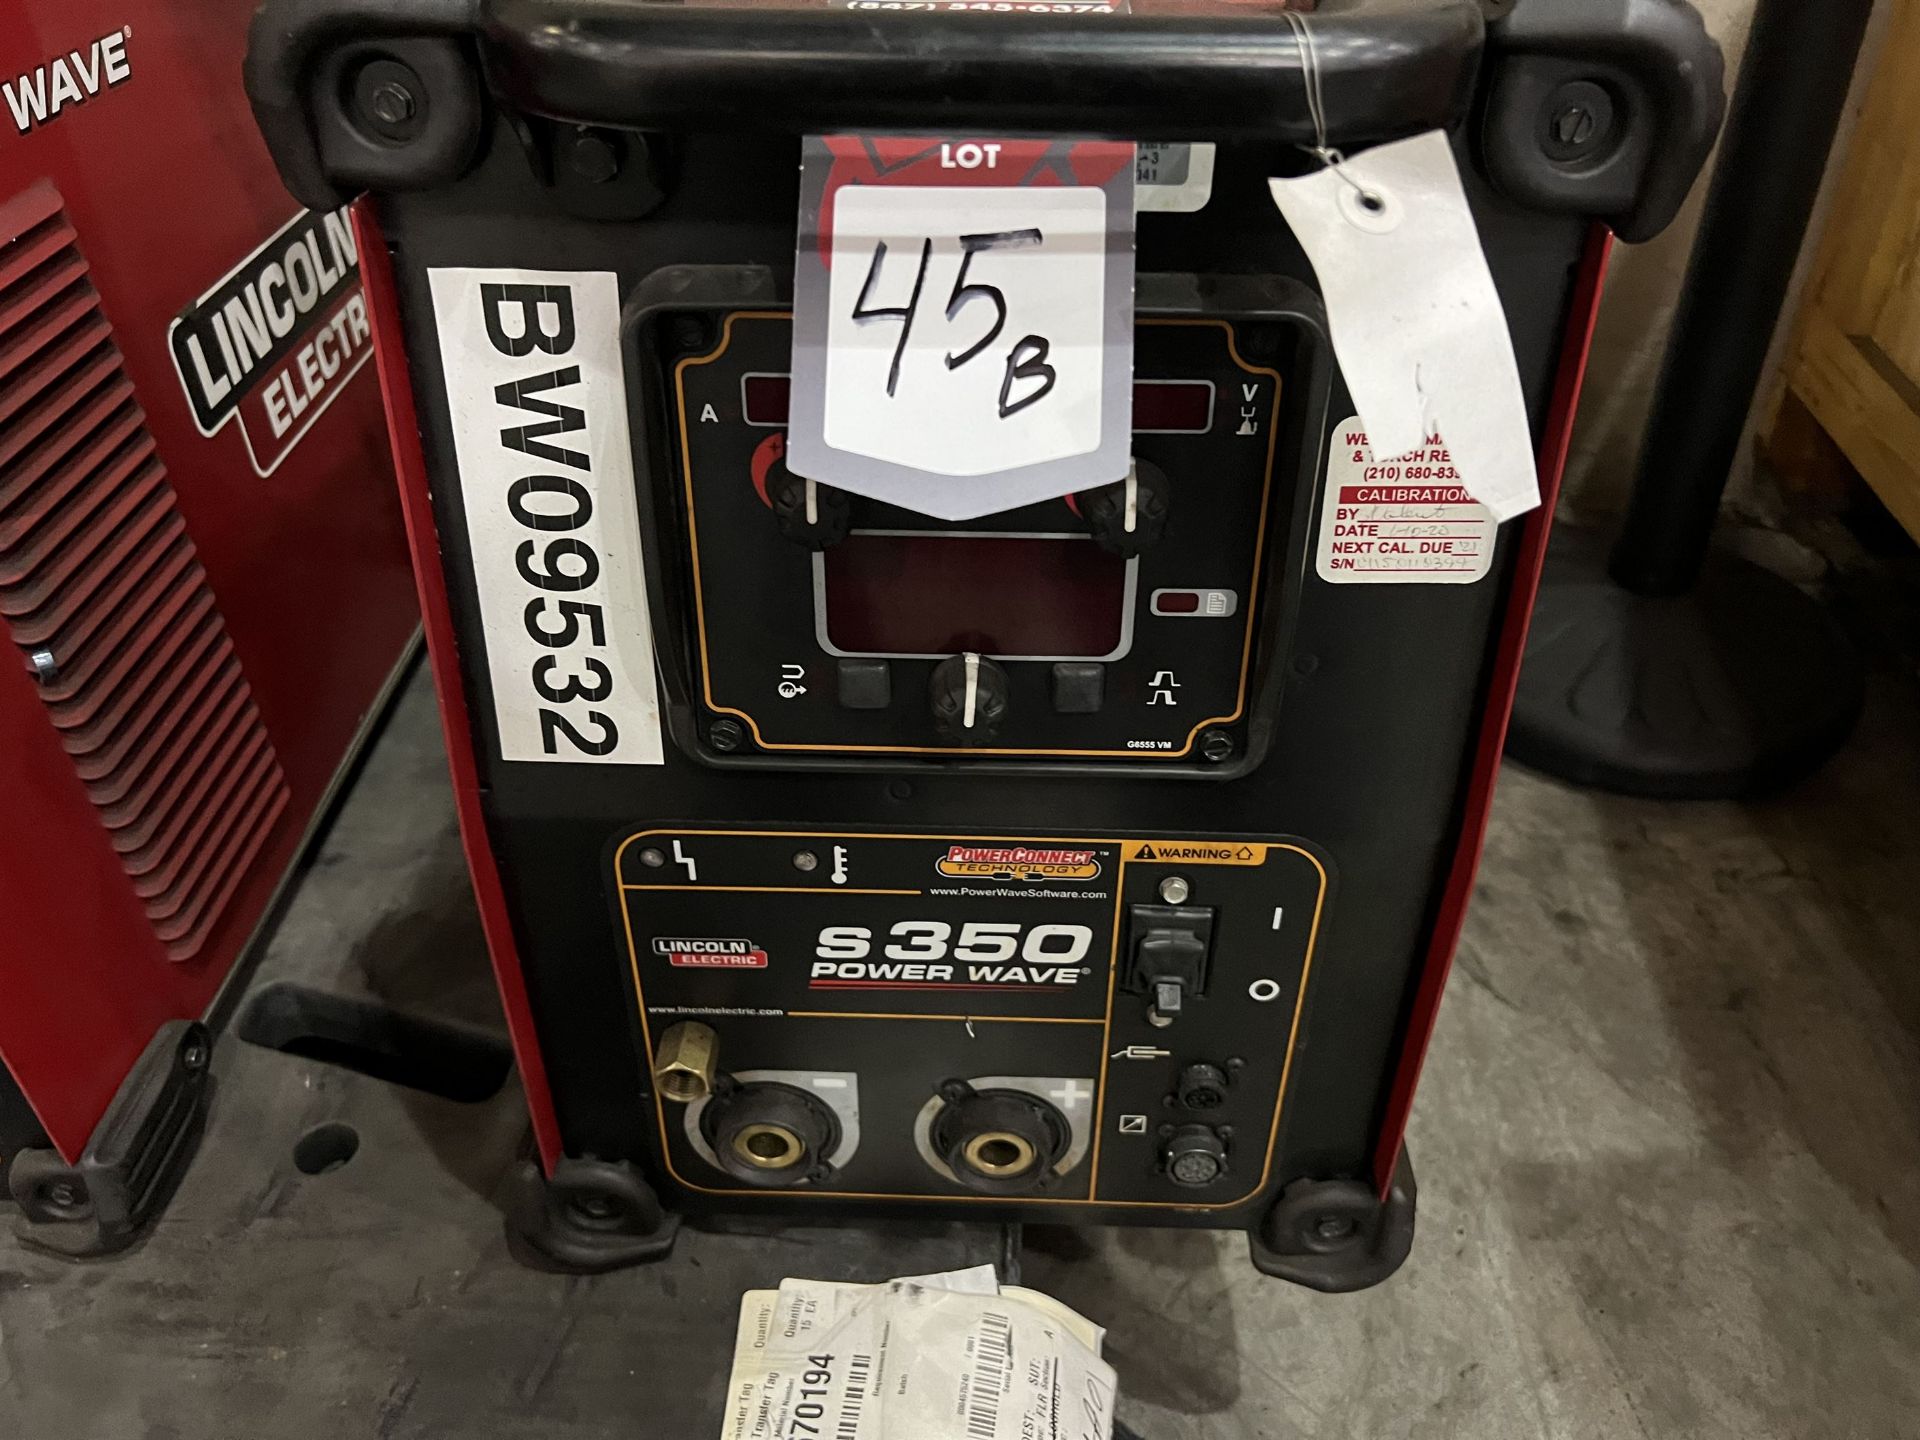 Lincoln S350 Power Wave Welder s/n U1150110399 (Located at 7300 Lone Tree Rd, Victoria, TX 77905)